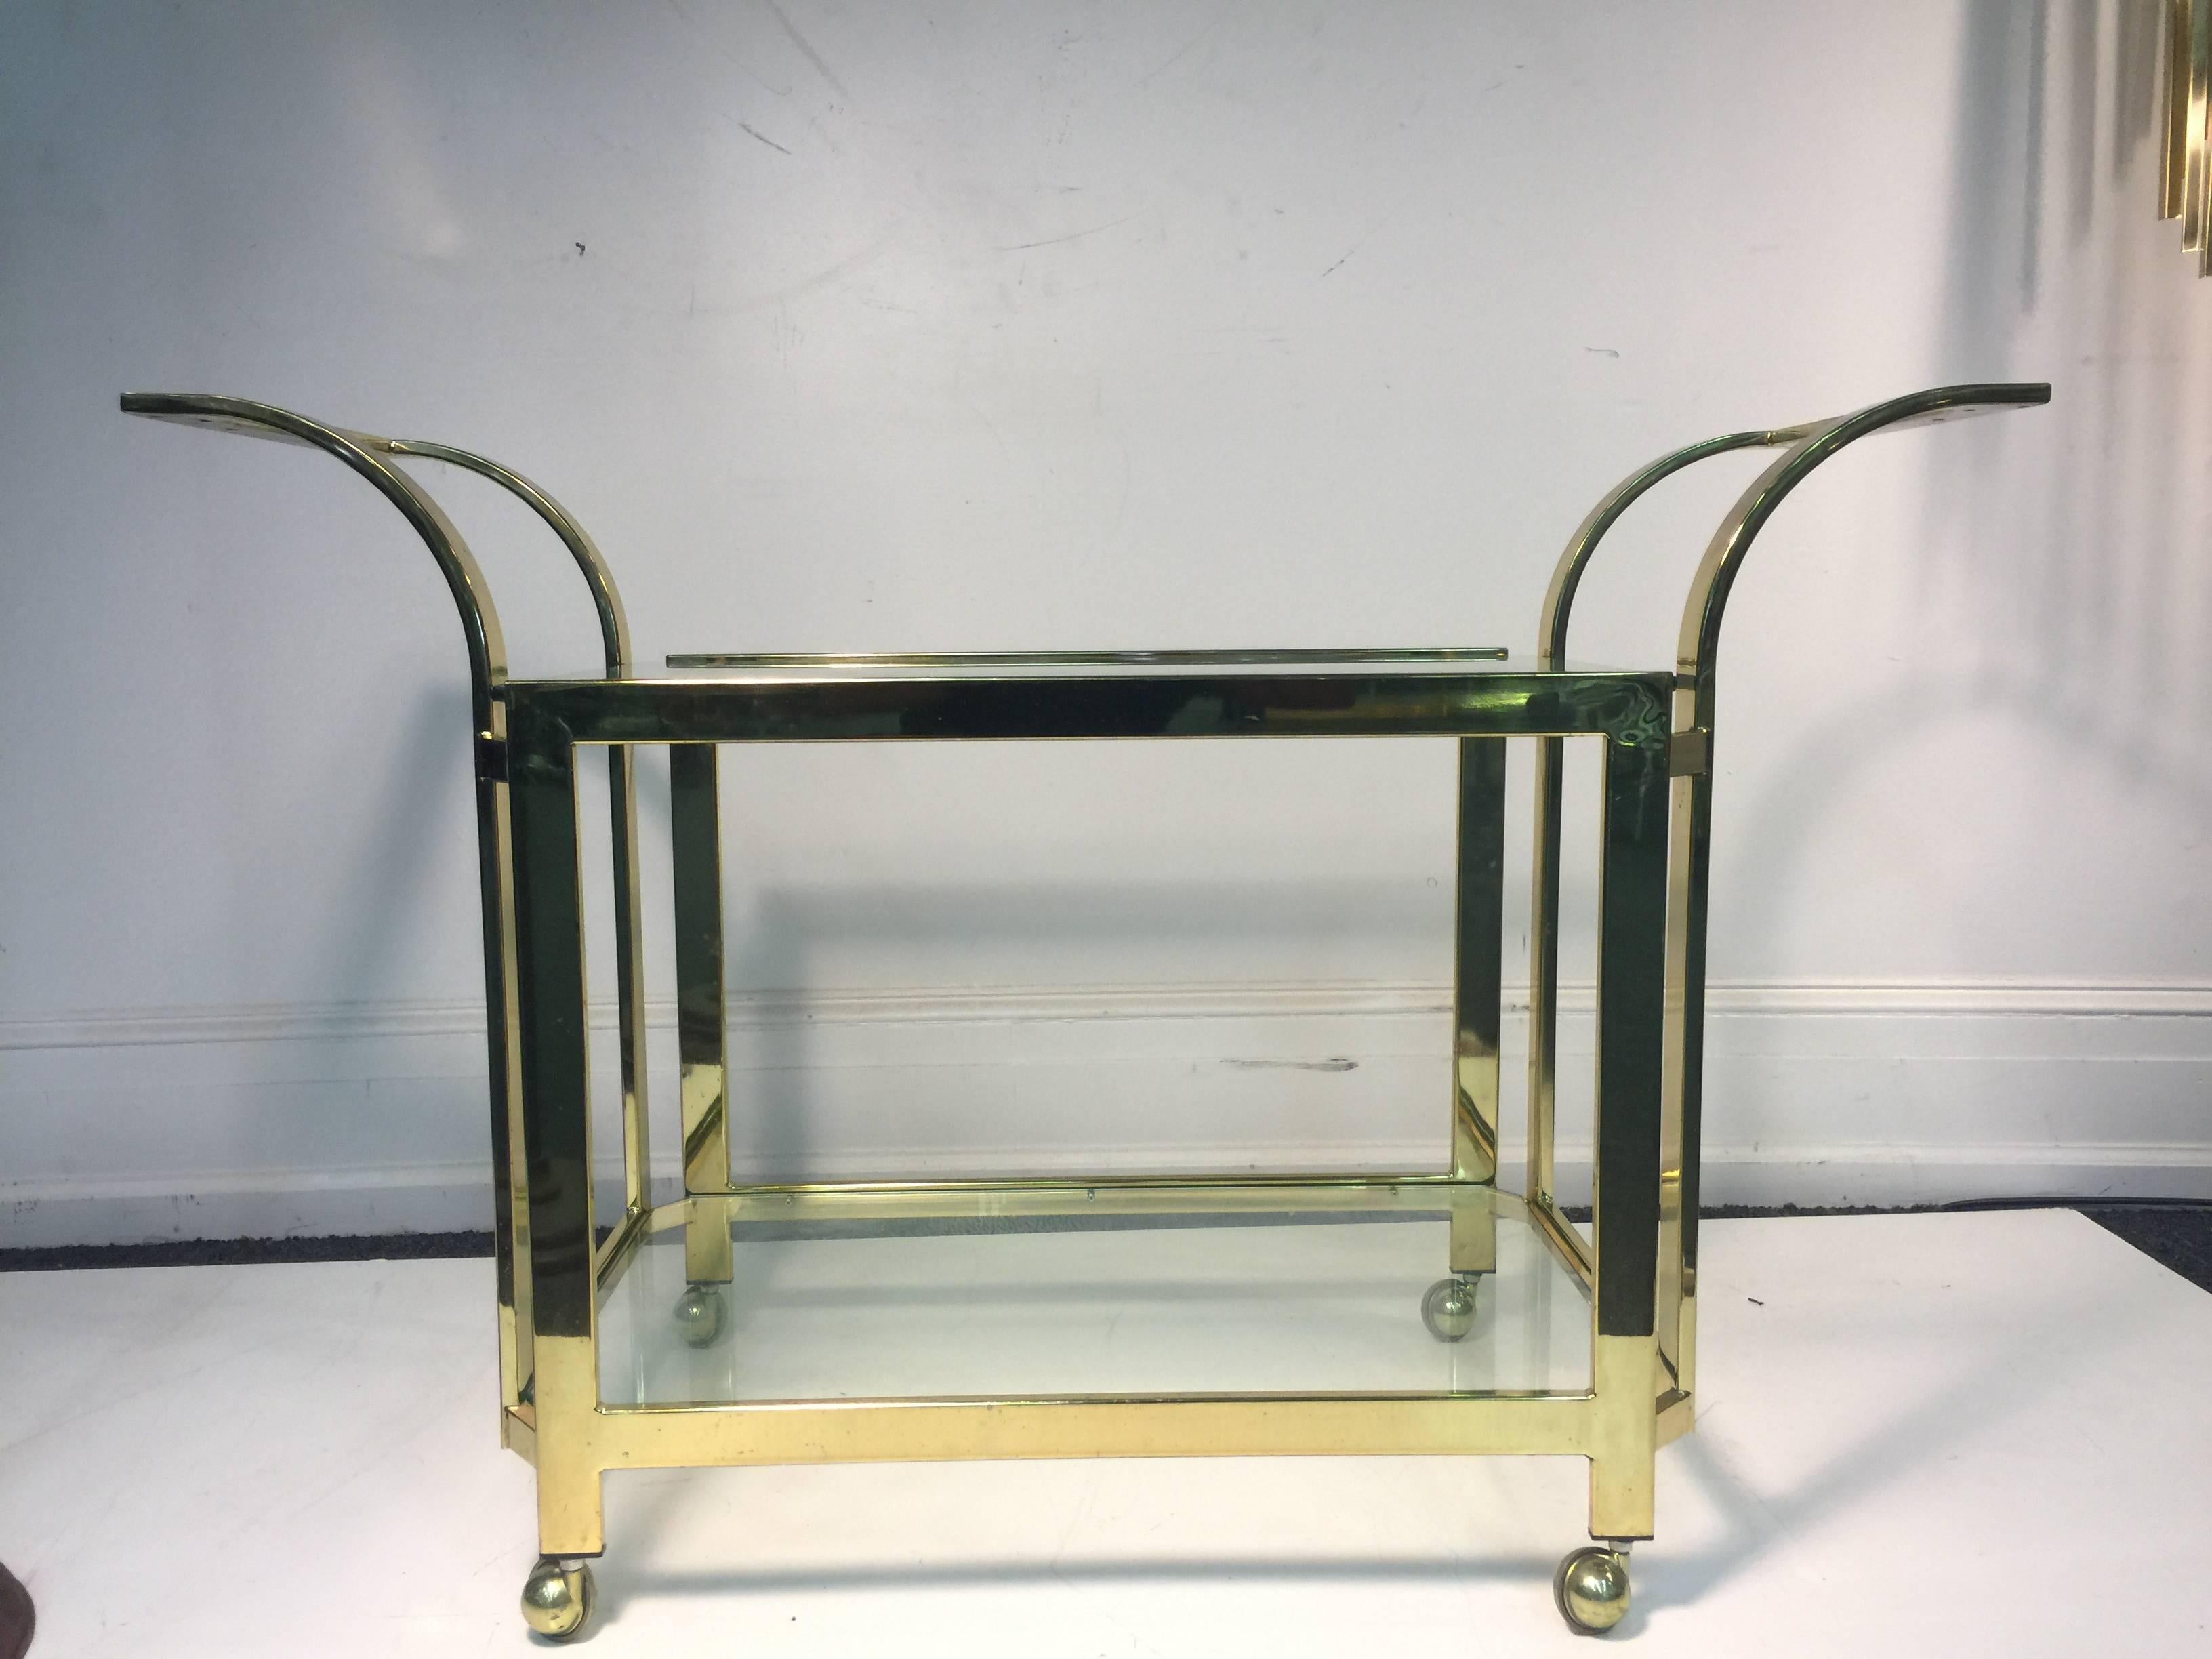 A beautifully designed two-tier brass and glass bar or tea cart by Milo Baughman, circa 1970. Good condition with age appropriate wear.